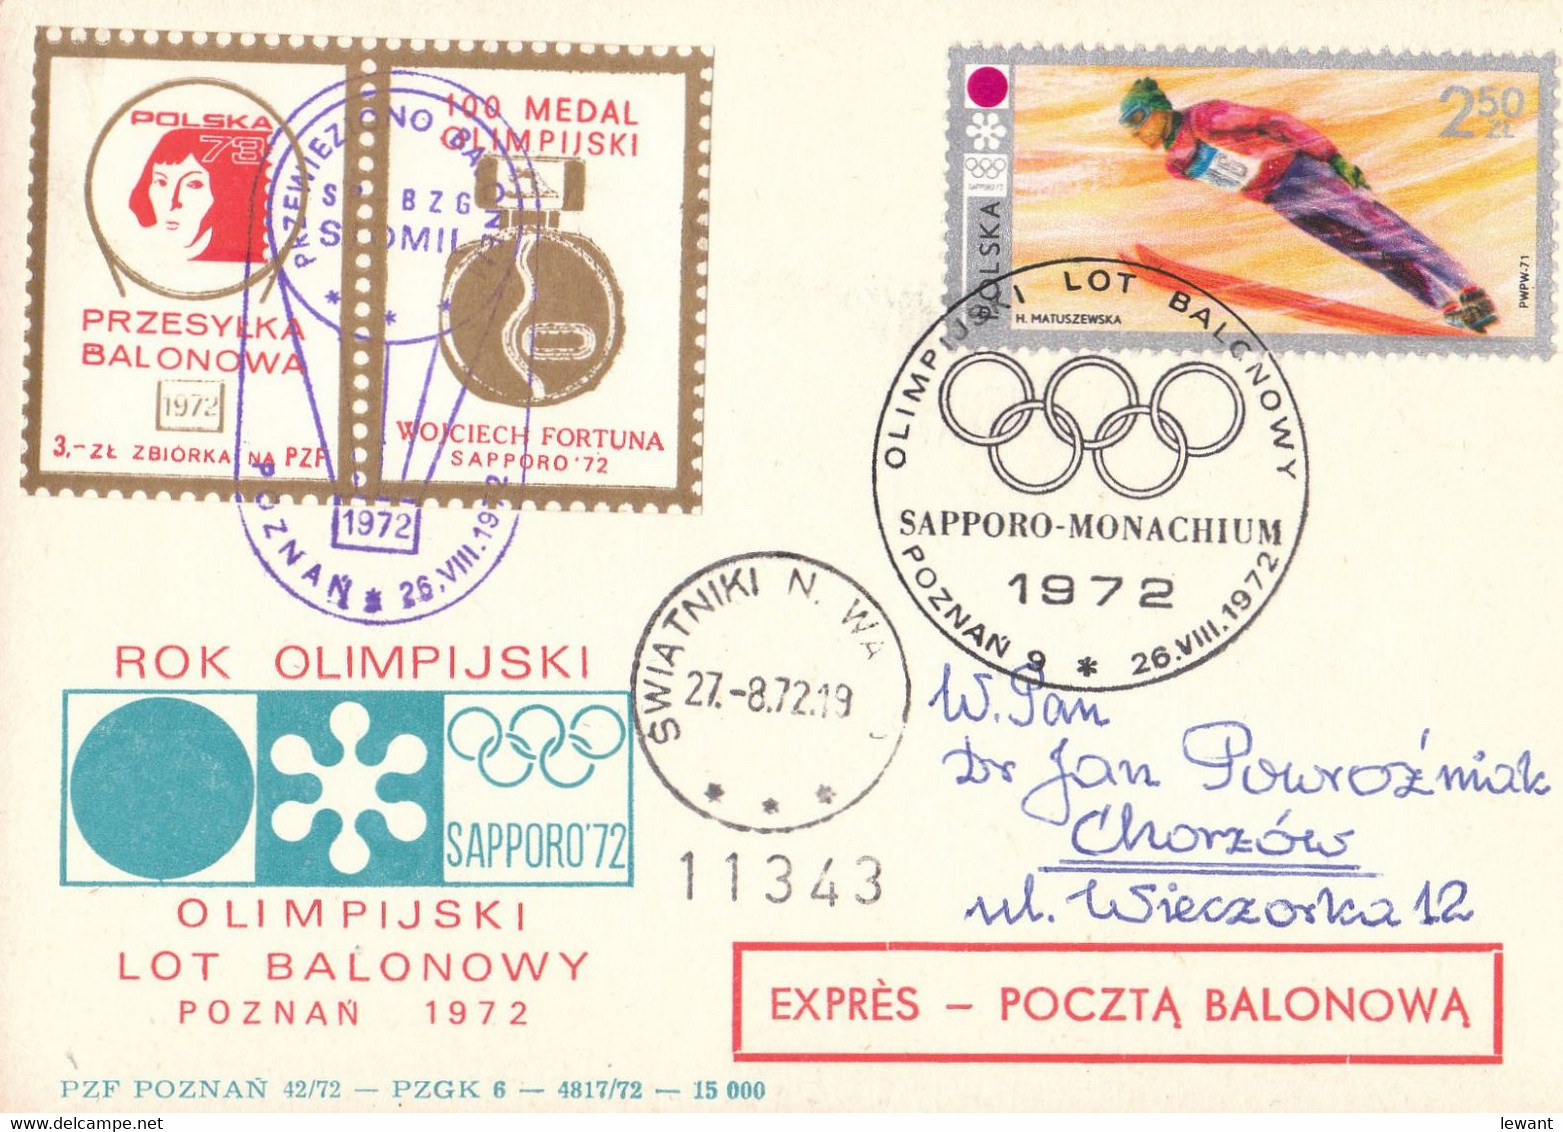 1972 ''STOMIL'' Postal Balloon With A Special Date Stamp For The Olympic Games In Sapporo And Munich (11343) POWR - Balloons